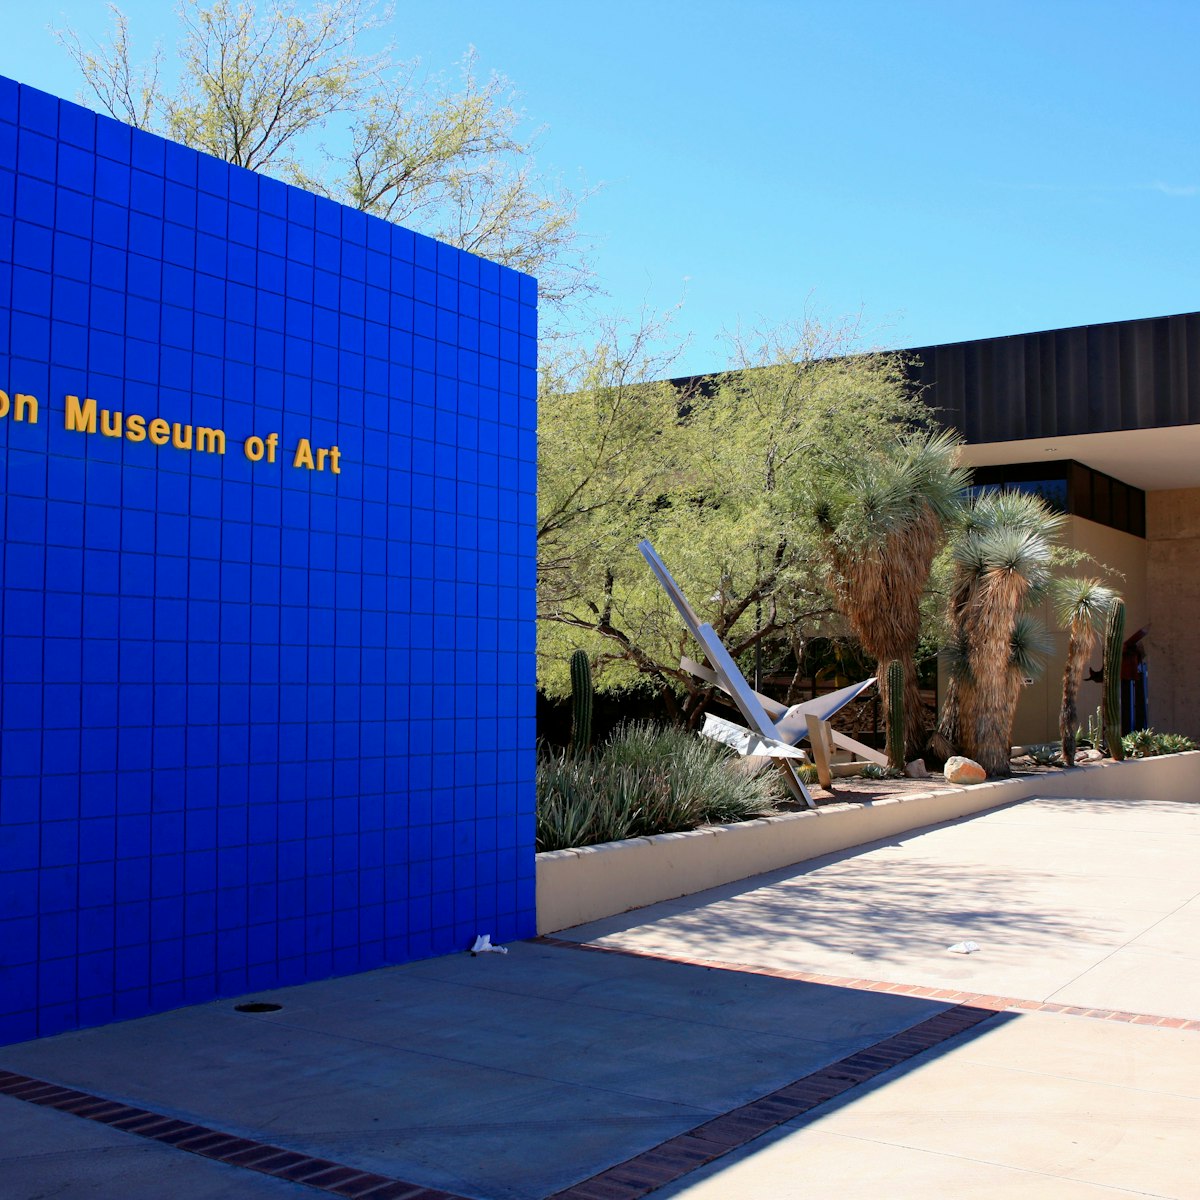 Outside the Tucson Museum of Art on N Main Ave in Arizona